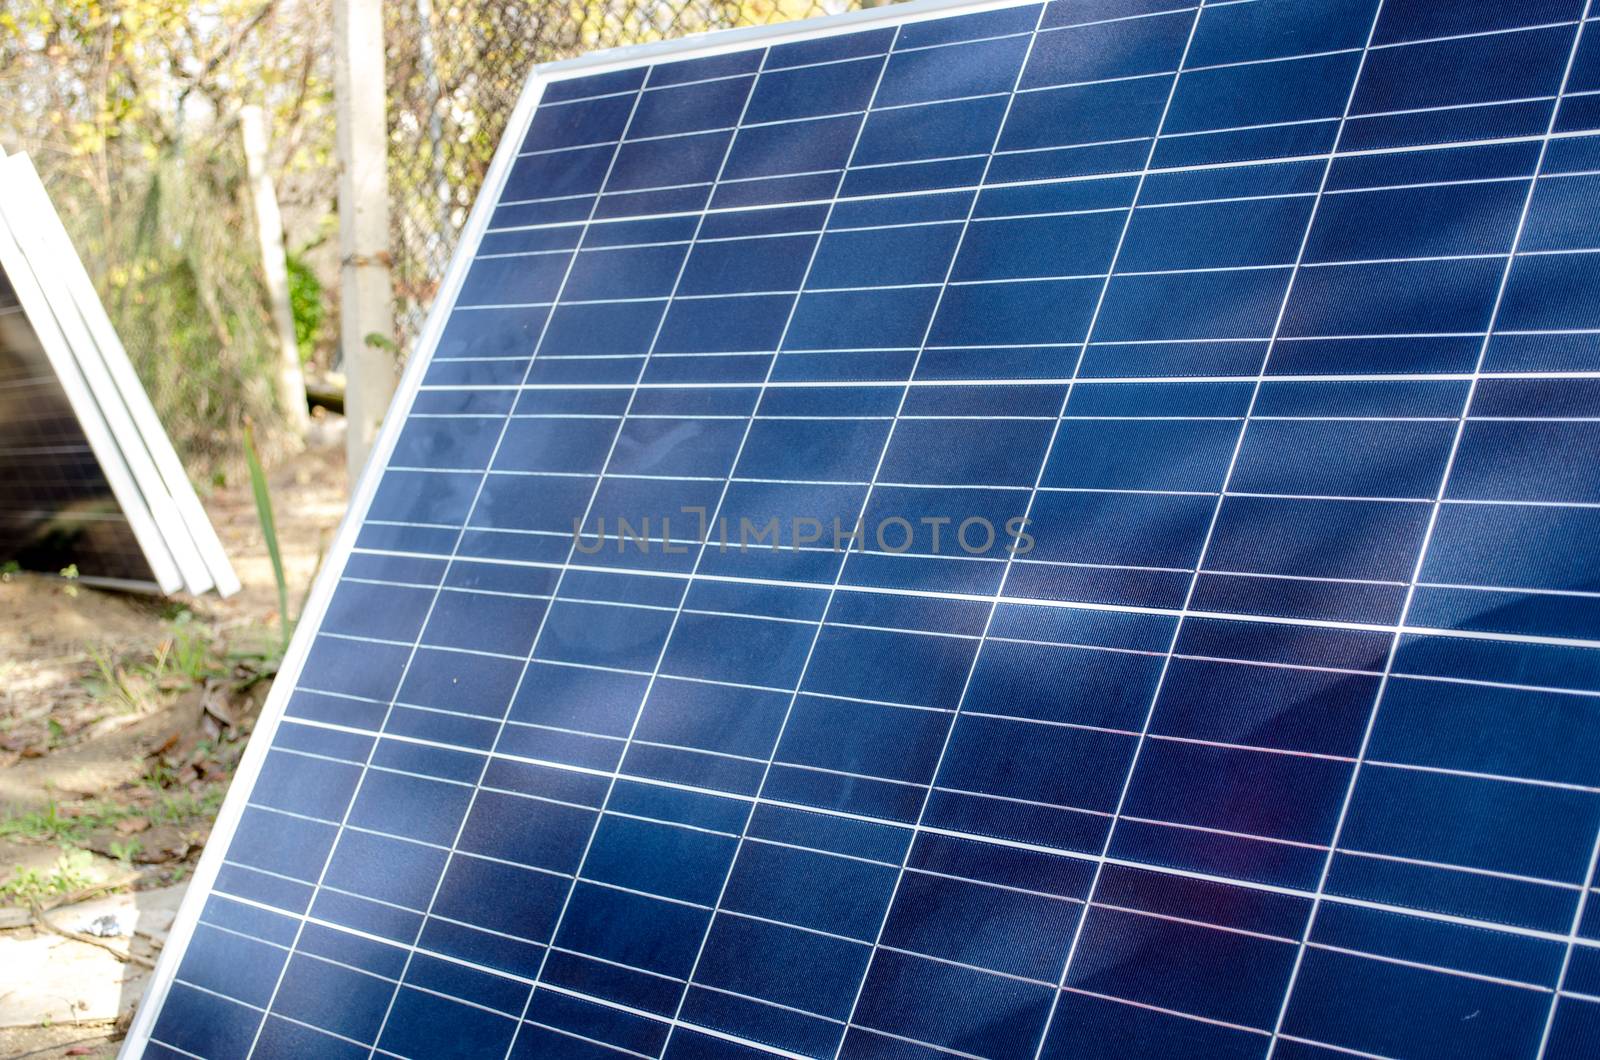 Detail of a photovoltaic panel for renewable electric production